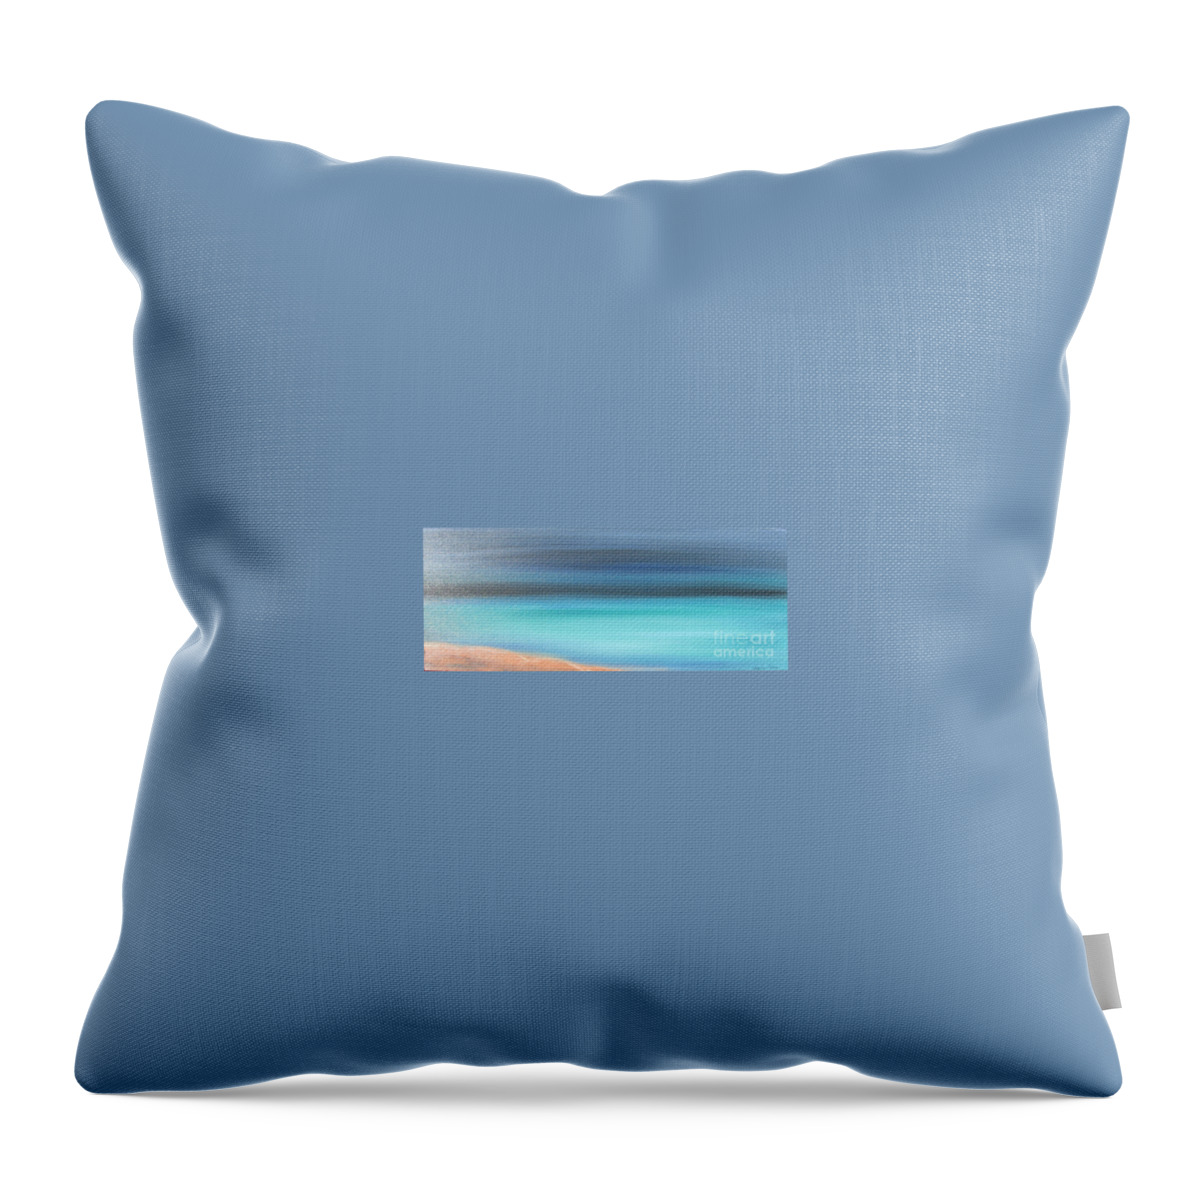 Blue Throw Pillow featuring the painting Waiting by Jacqueline Athmann